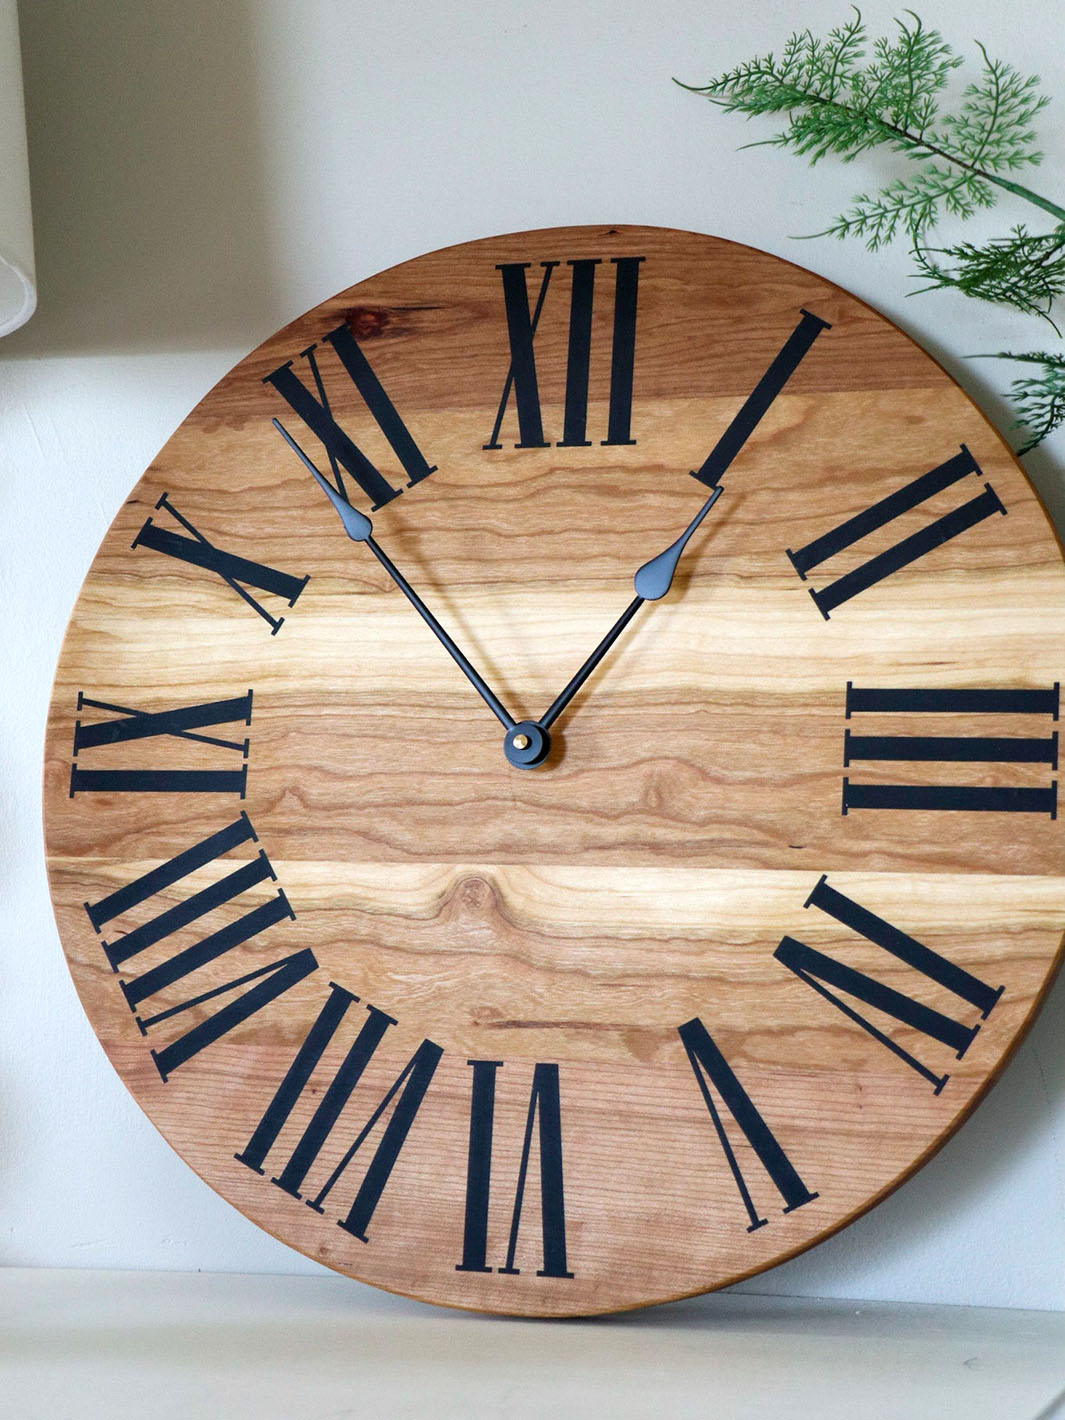 Sappy 18" Solid Cherry Hardwood Wall Clock with Black Roman Numerals (in stock) Earthly Comfort Clocks 2127-4